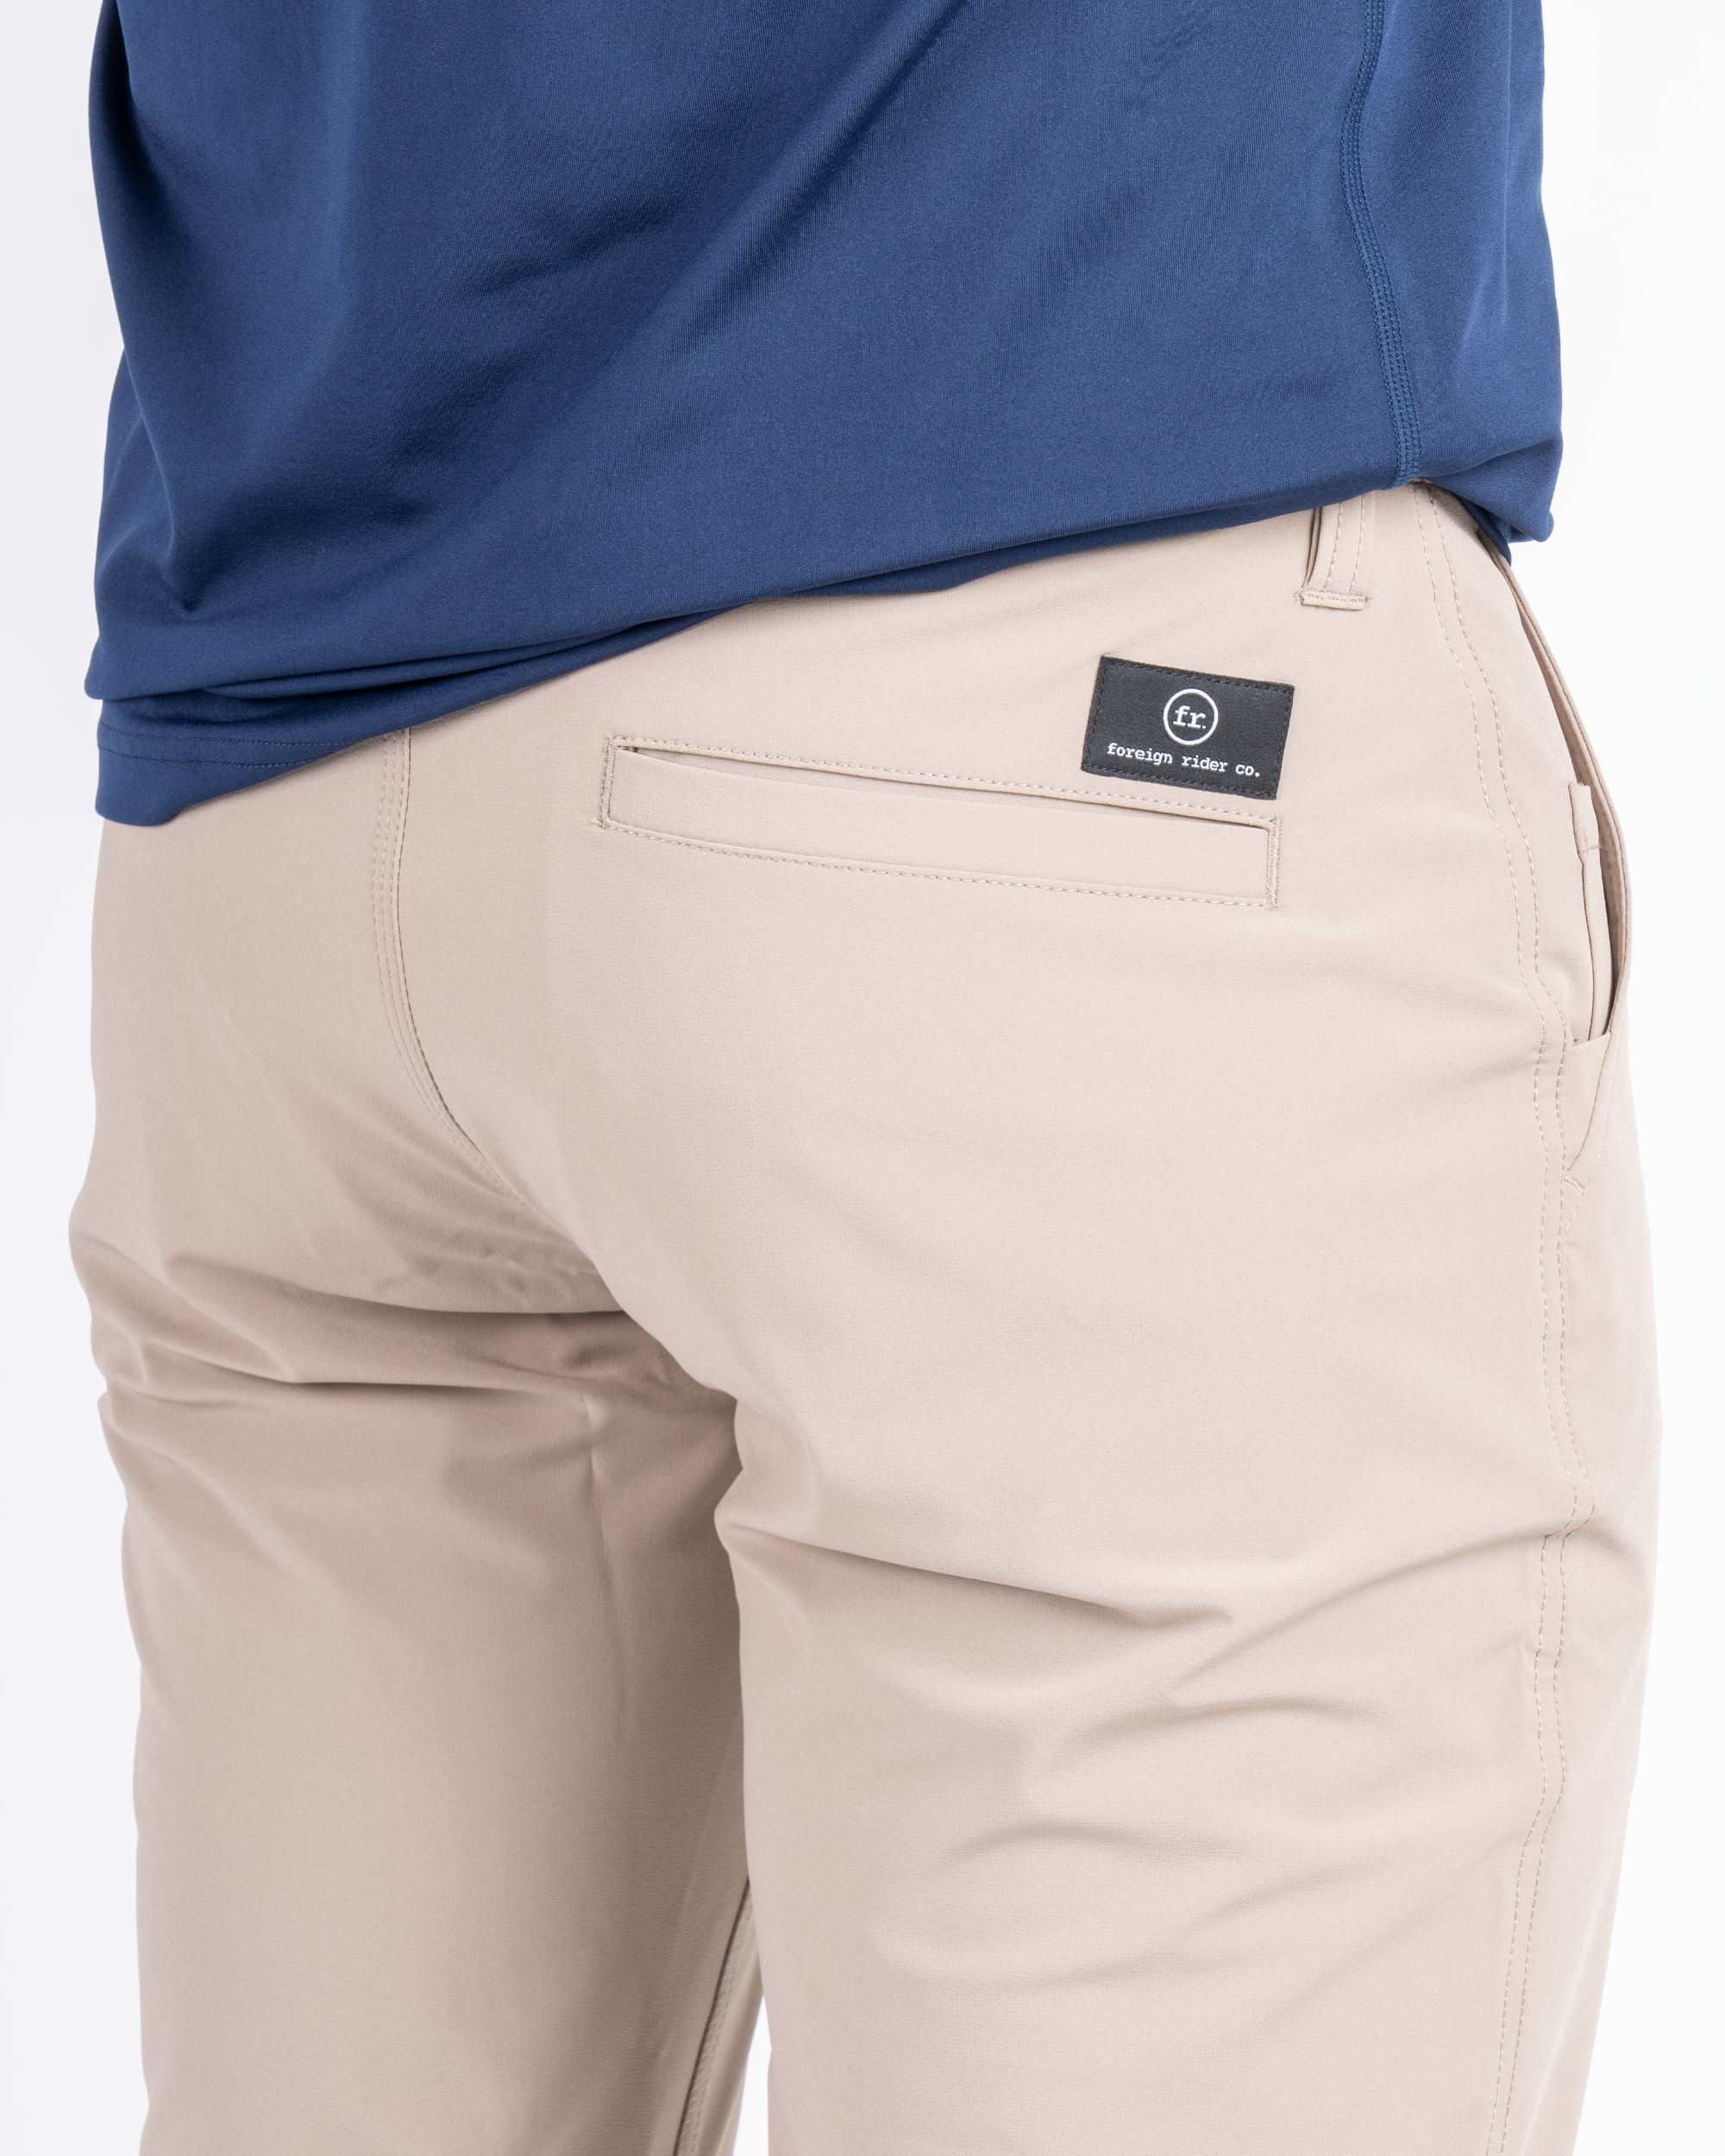 Foreign Rider Co Technical Fabric Tan Pants Back Pocket Detail